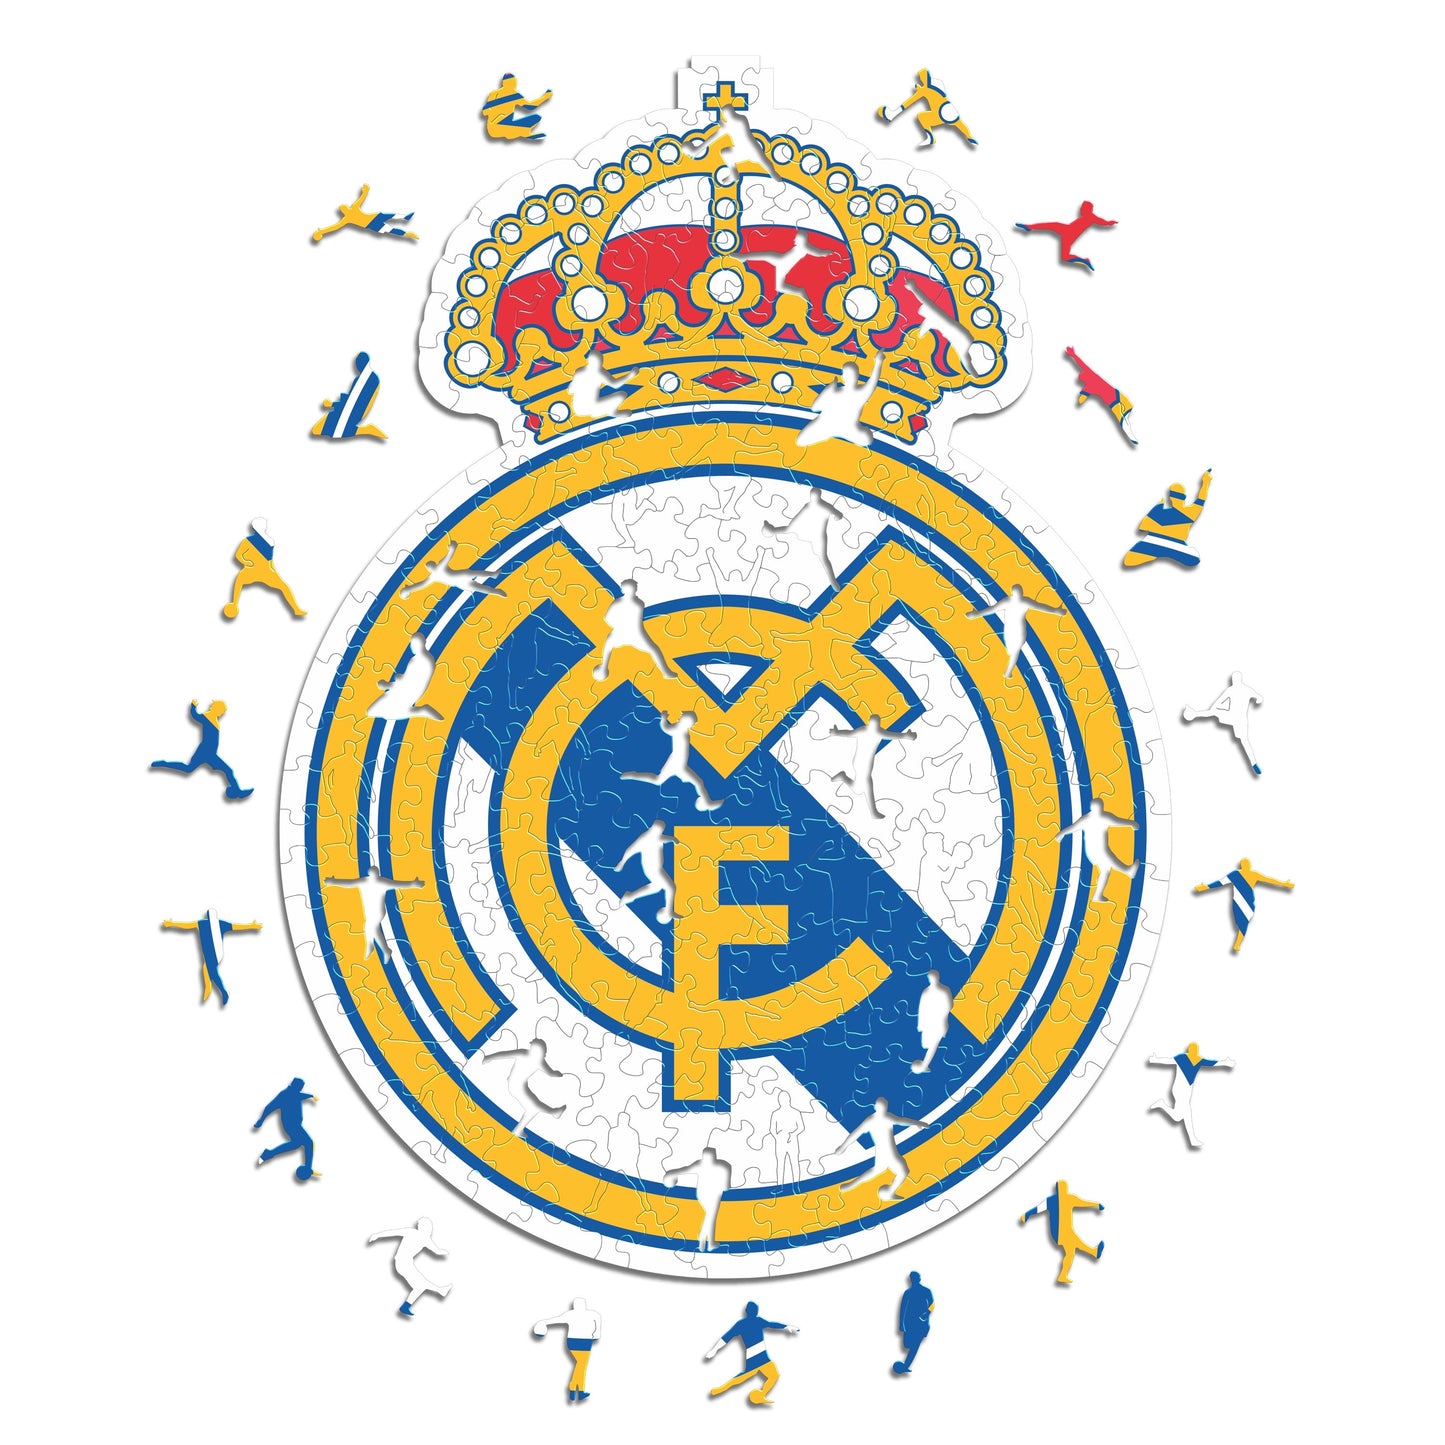 2 PACK Real Madrid CF® Logo + 5 Players